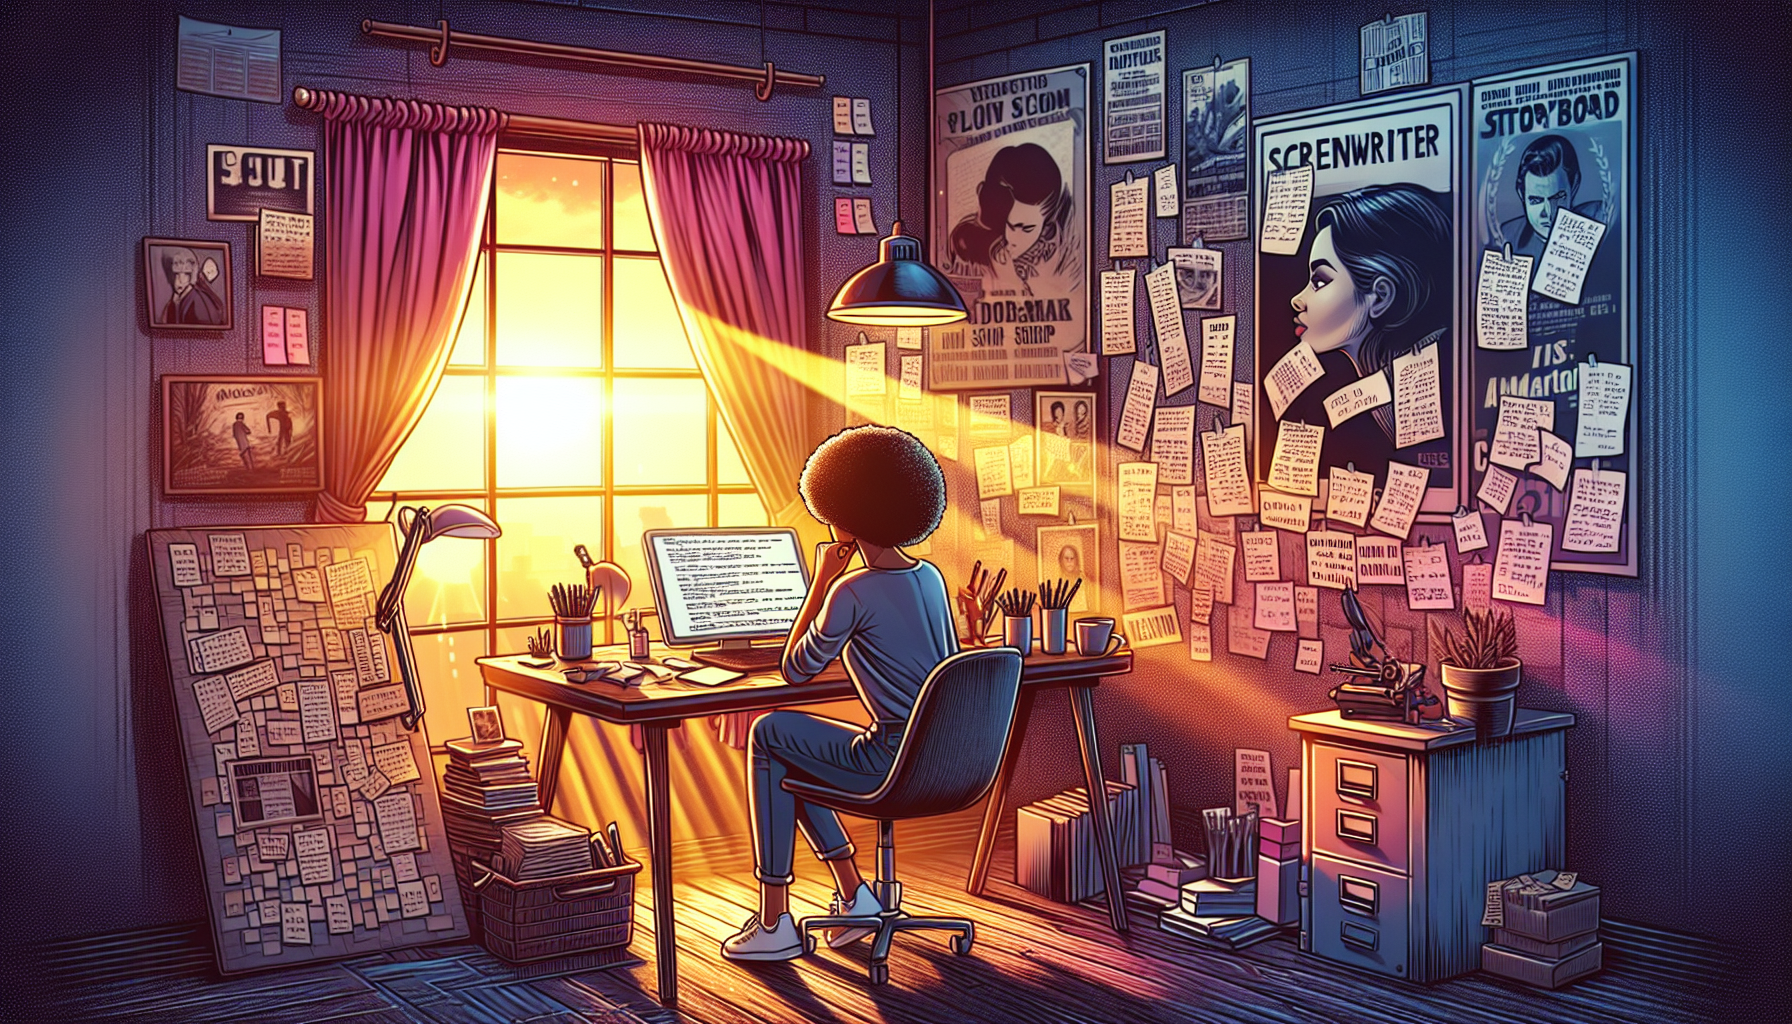 An artist's rendition of a screenwriter brainstorming in a cozy, creative studio filled with film posters, a glowing computer screen displaying a script, and storyboards pinned on the walls, while a w